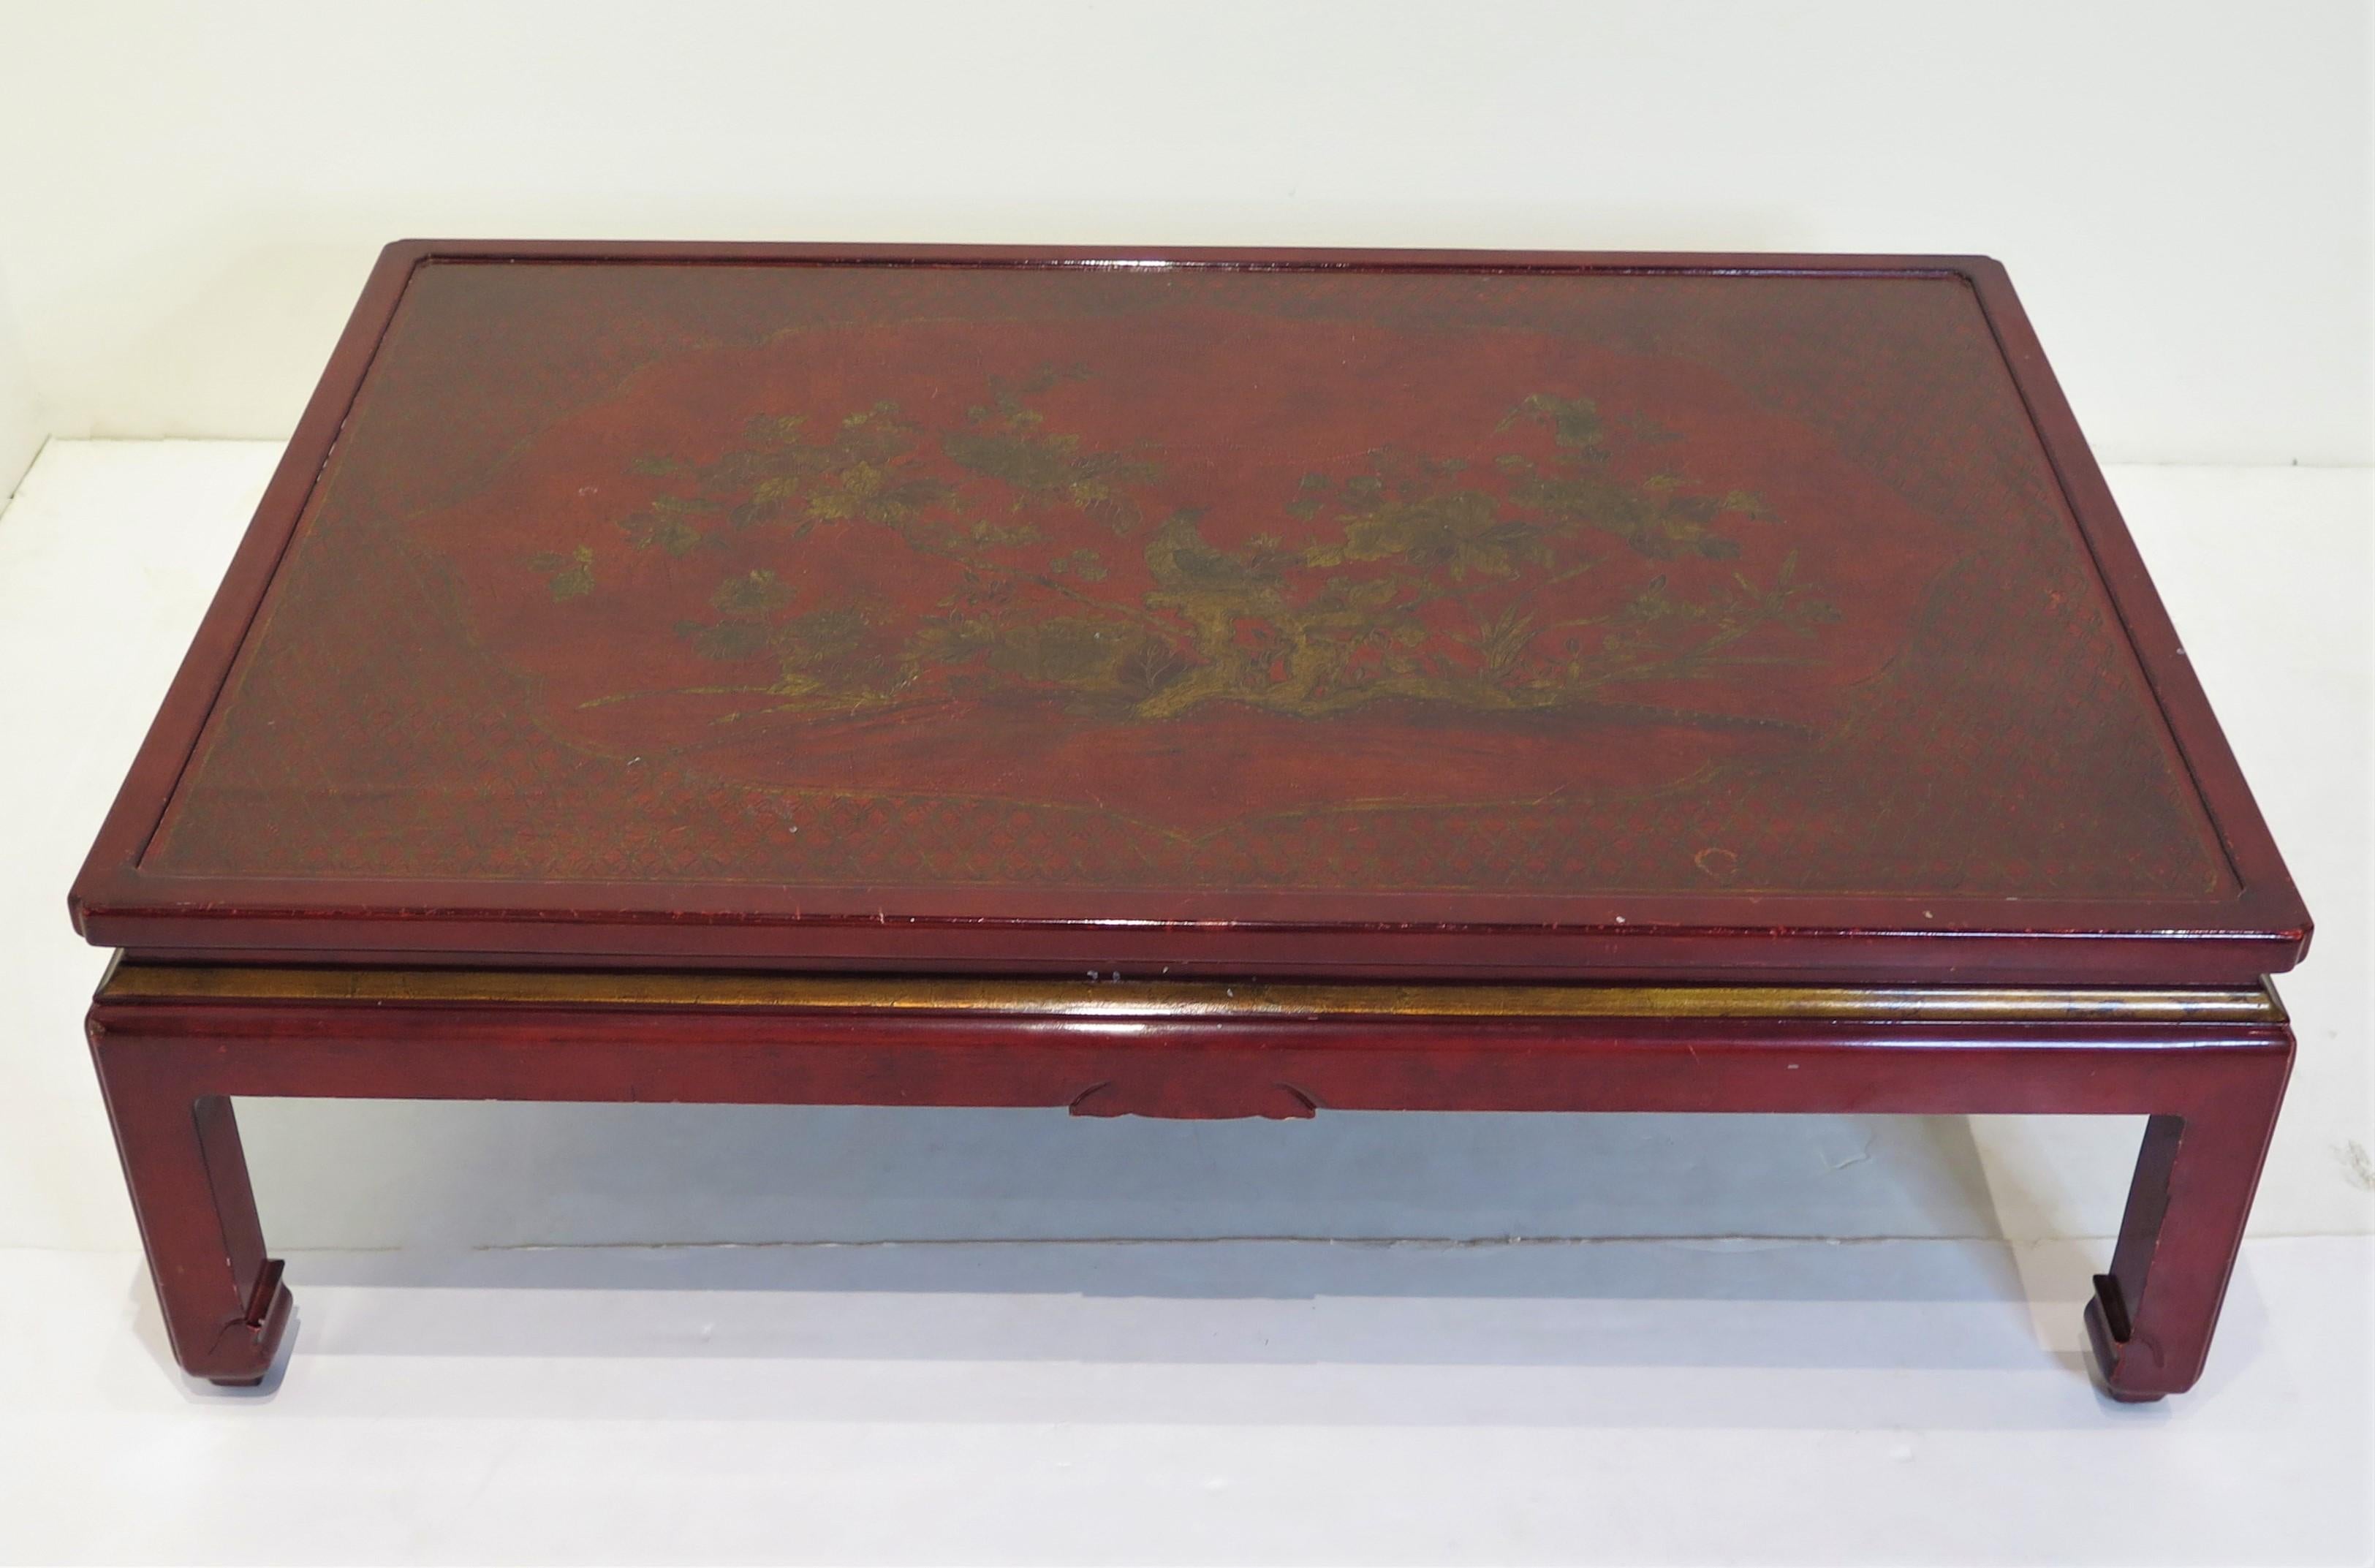 red lacquerware coffee table with gold gilt decoration, Chinese-style Anne Midavaine of ATELIER MIDAVAINE PARIS 20th century, Paris, France